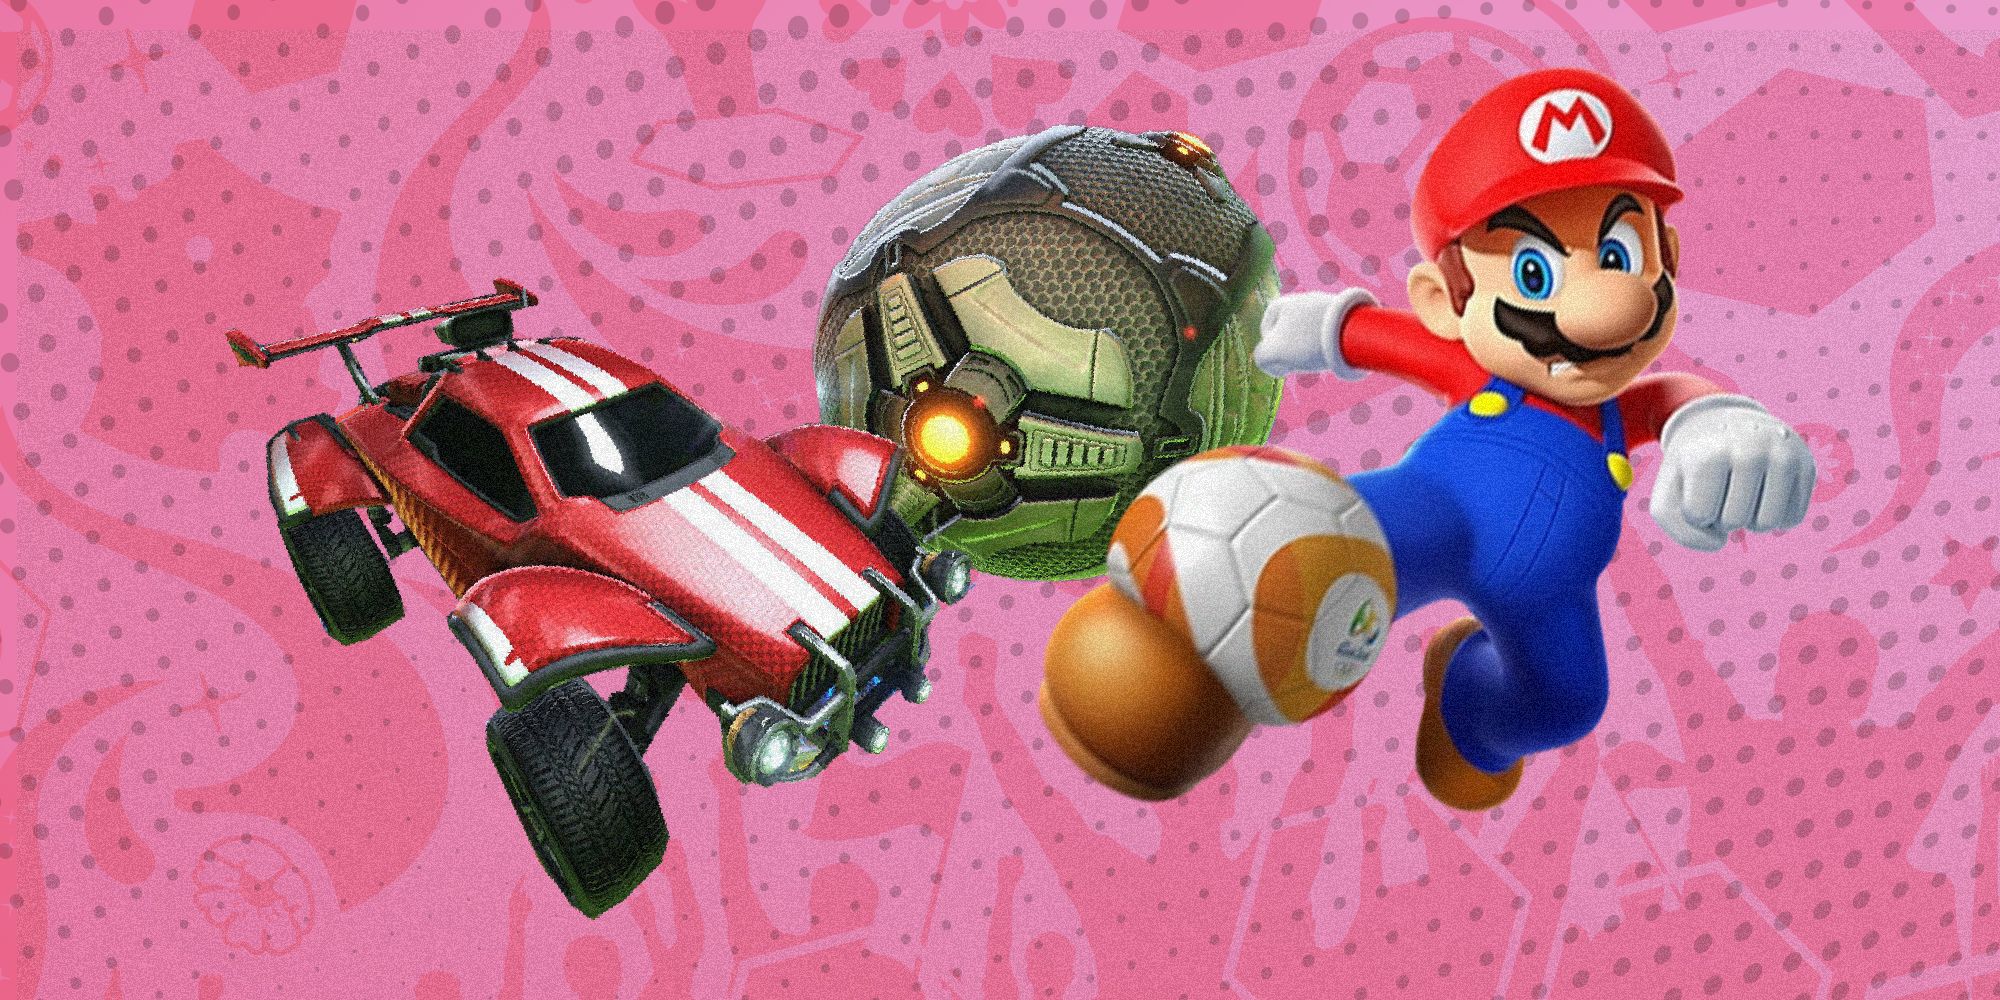 Mario kicking a football with a Rocket League car and ball nearby and a pink background